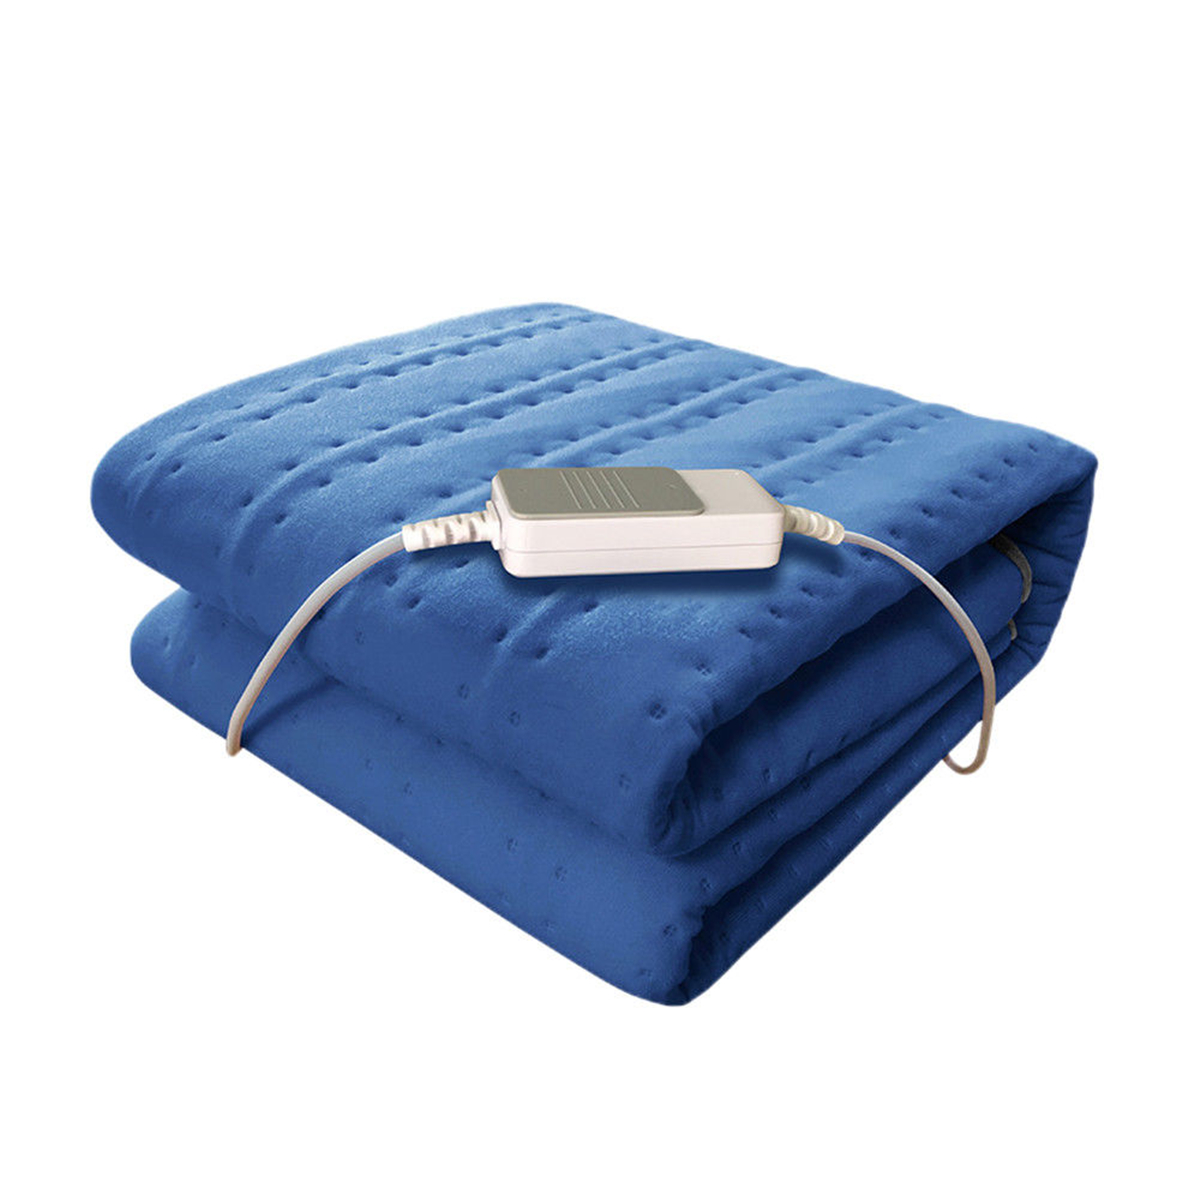 Winter Electric Blanket Warm Heating Mat Pad Throw Over Under Bed Mattress Non-Woven Fabric Blanket Adjustable 3 Colors 150*75cm